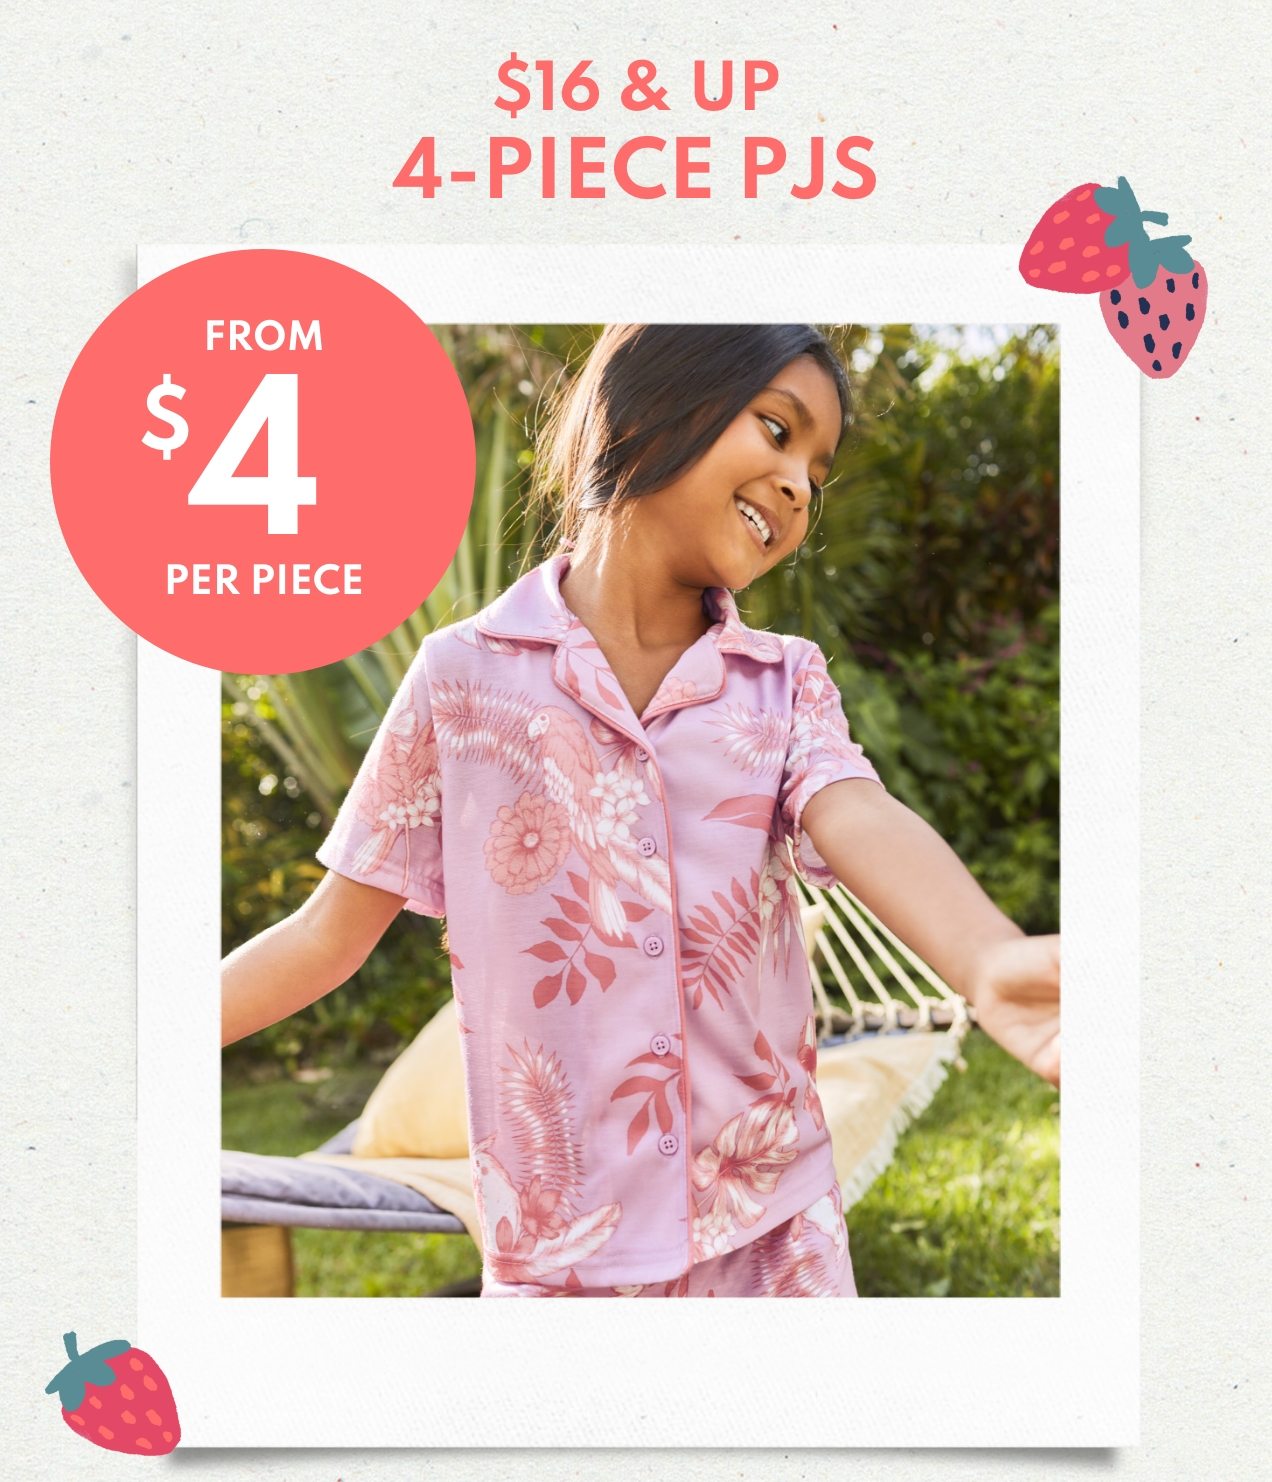 $16 & UP 4-PIECE PJS | FROM $4 PER PIECE 